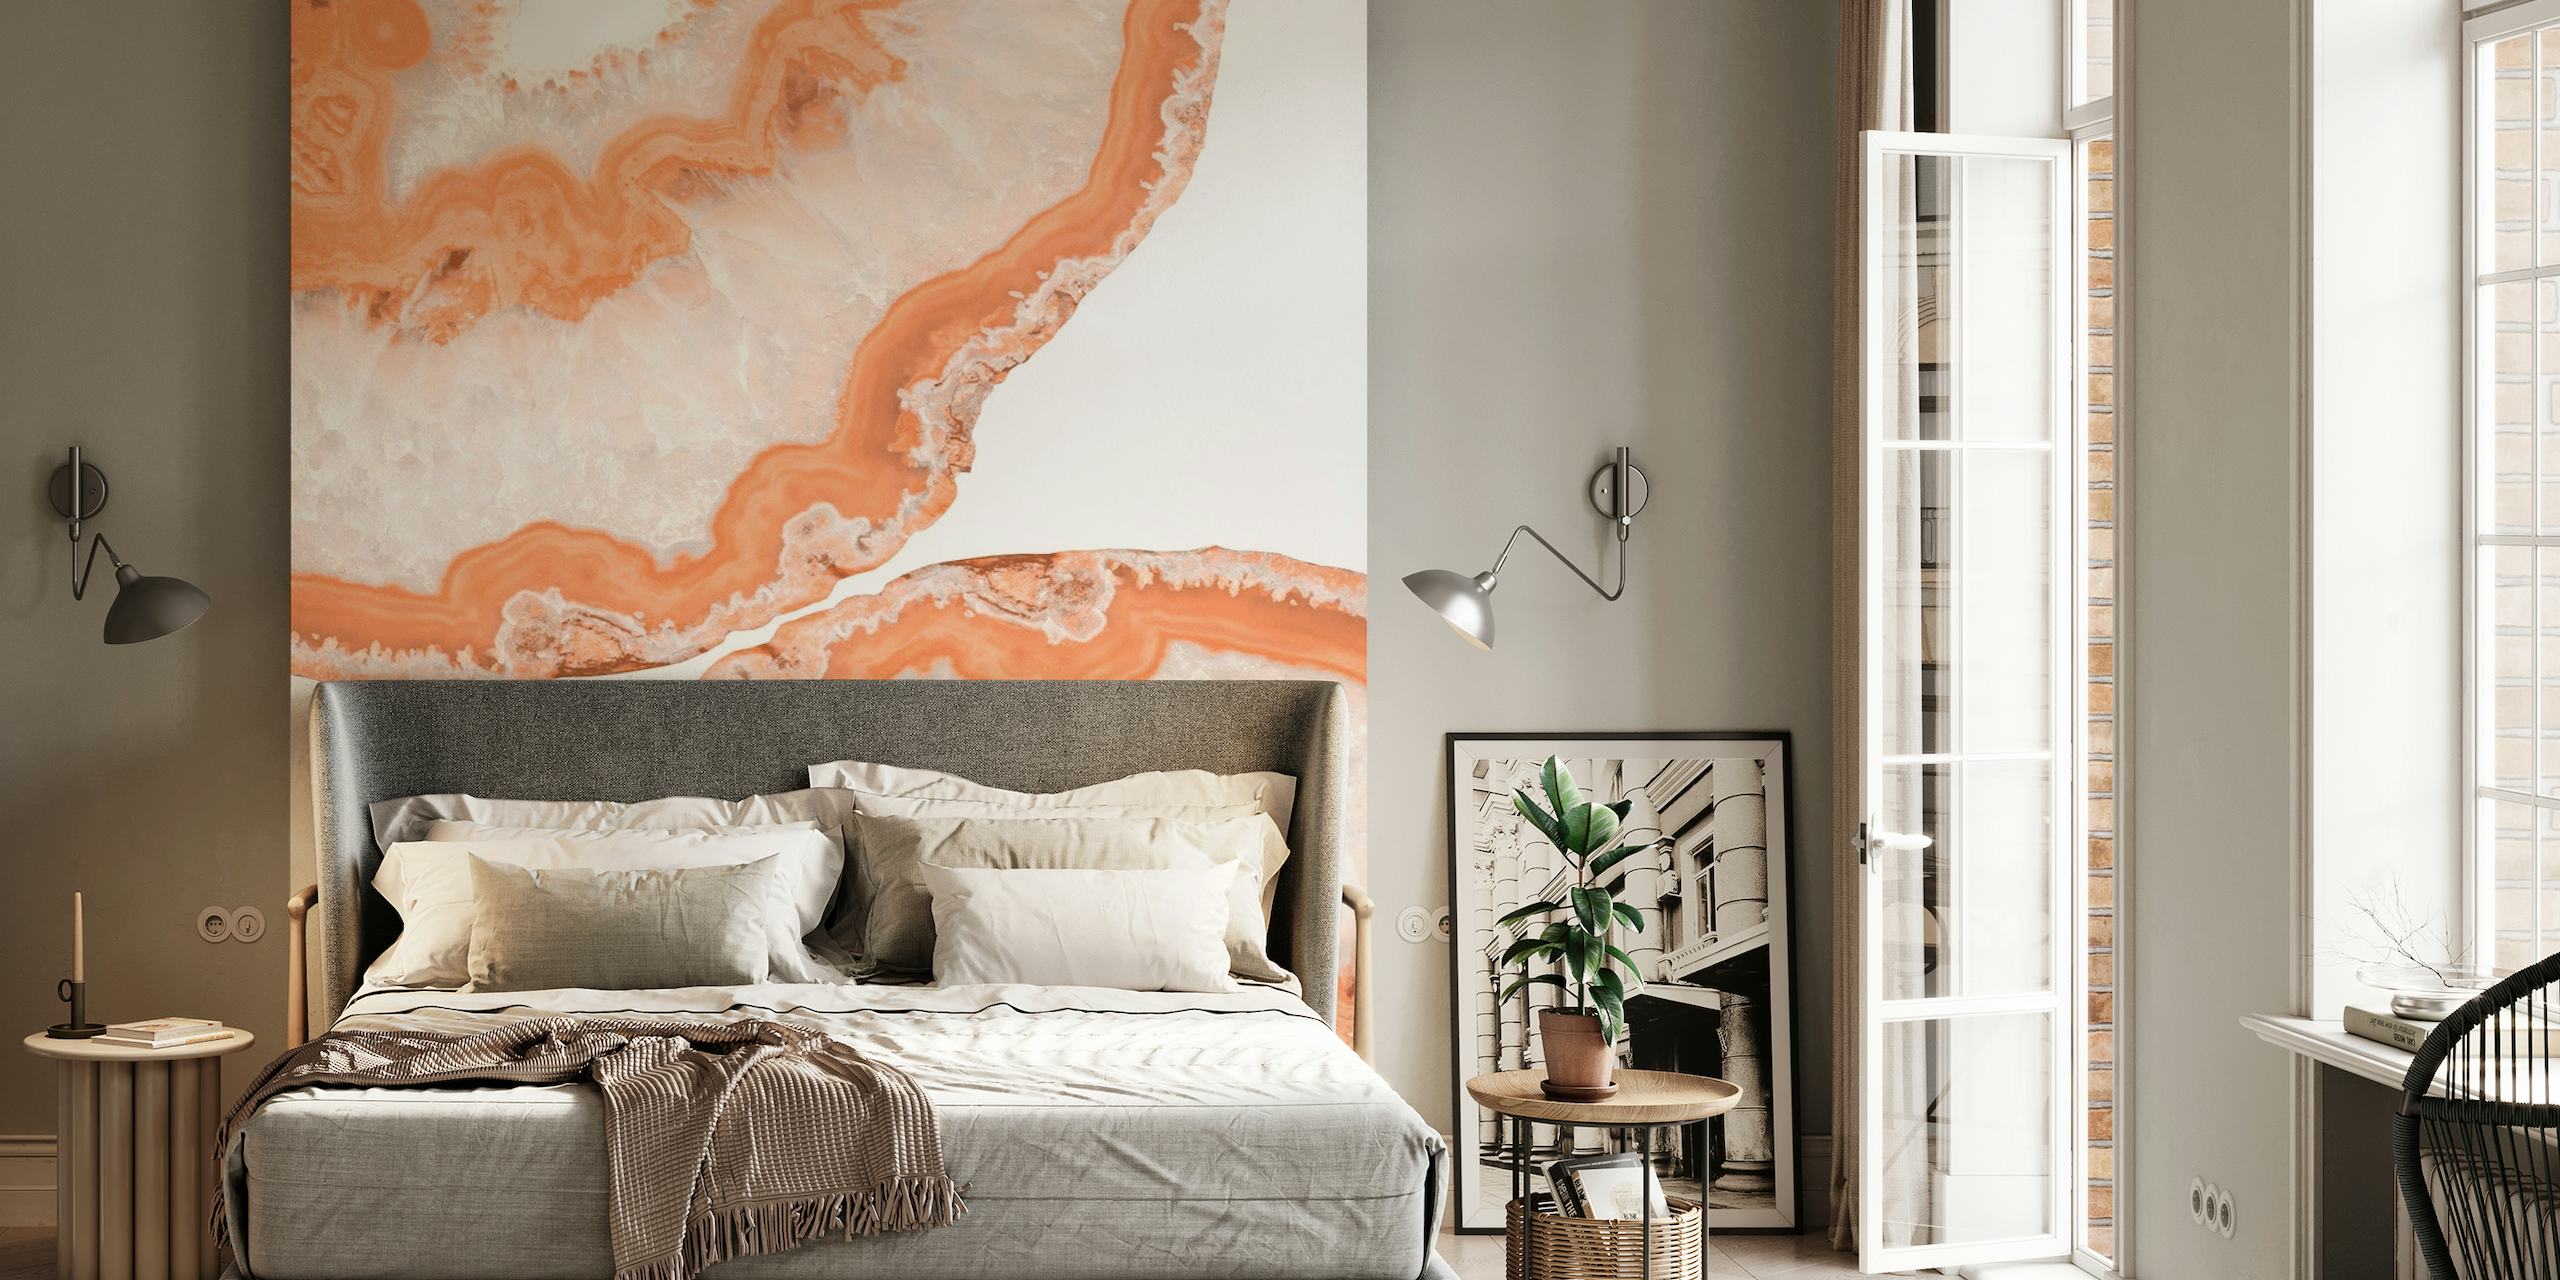 Yin Yang Agate Summer Glam 2 wall mural featuring peach and cream agate patterns